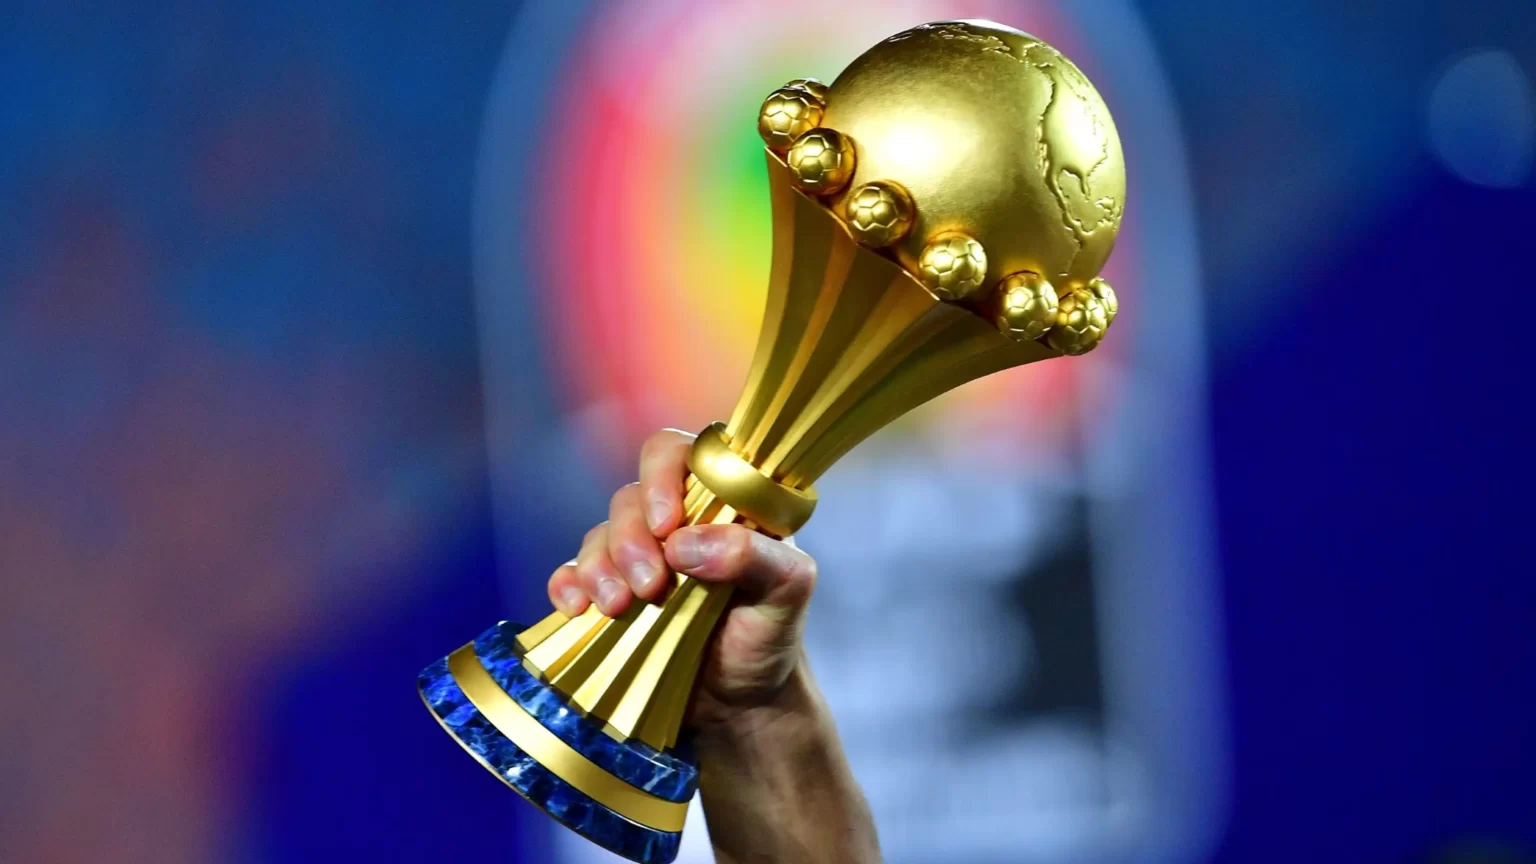 Afcon 2023 trophy